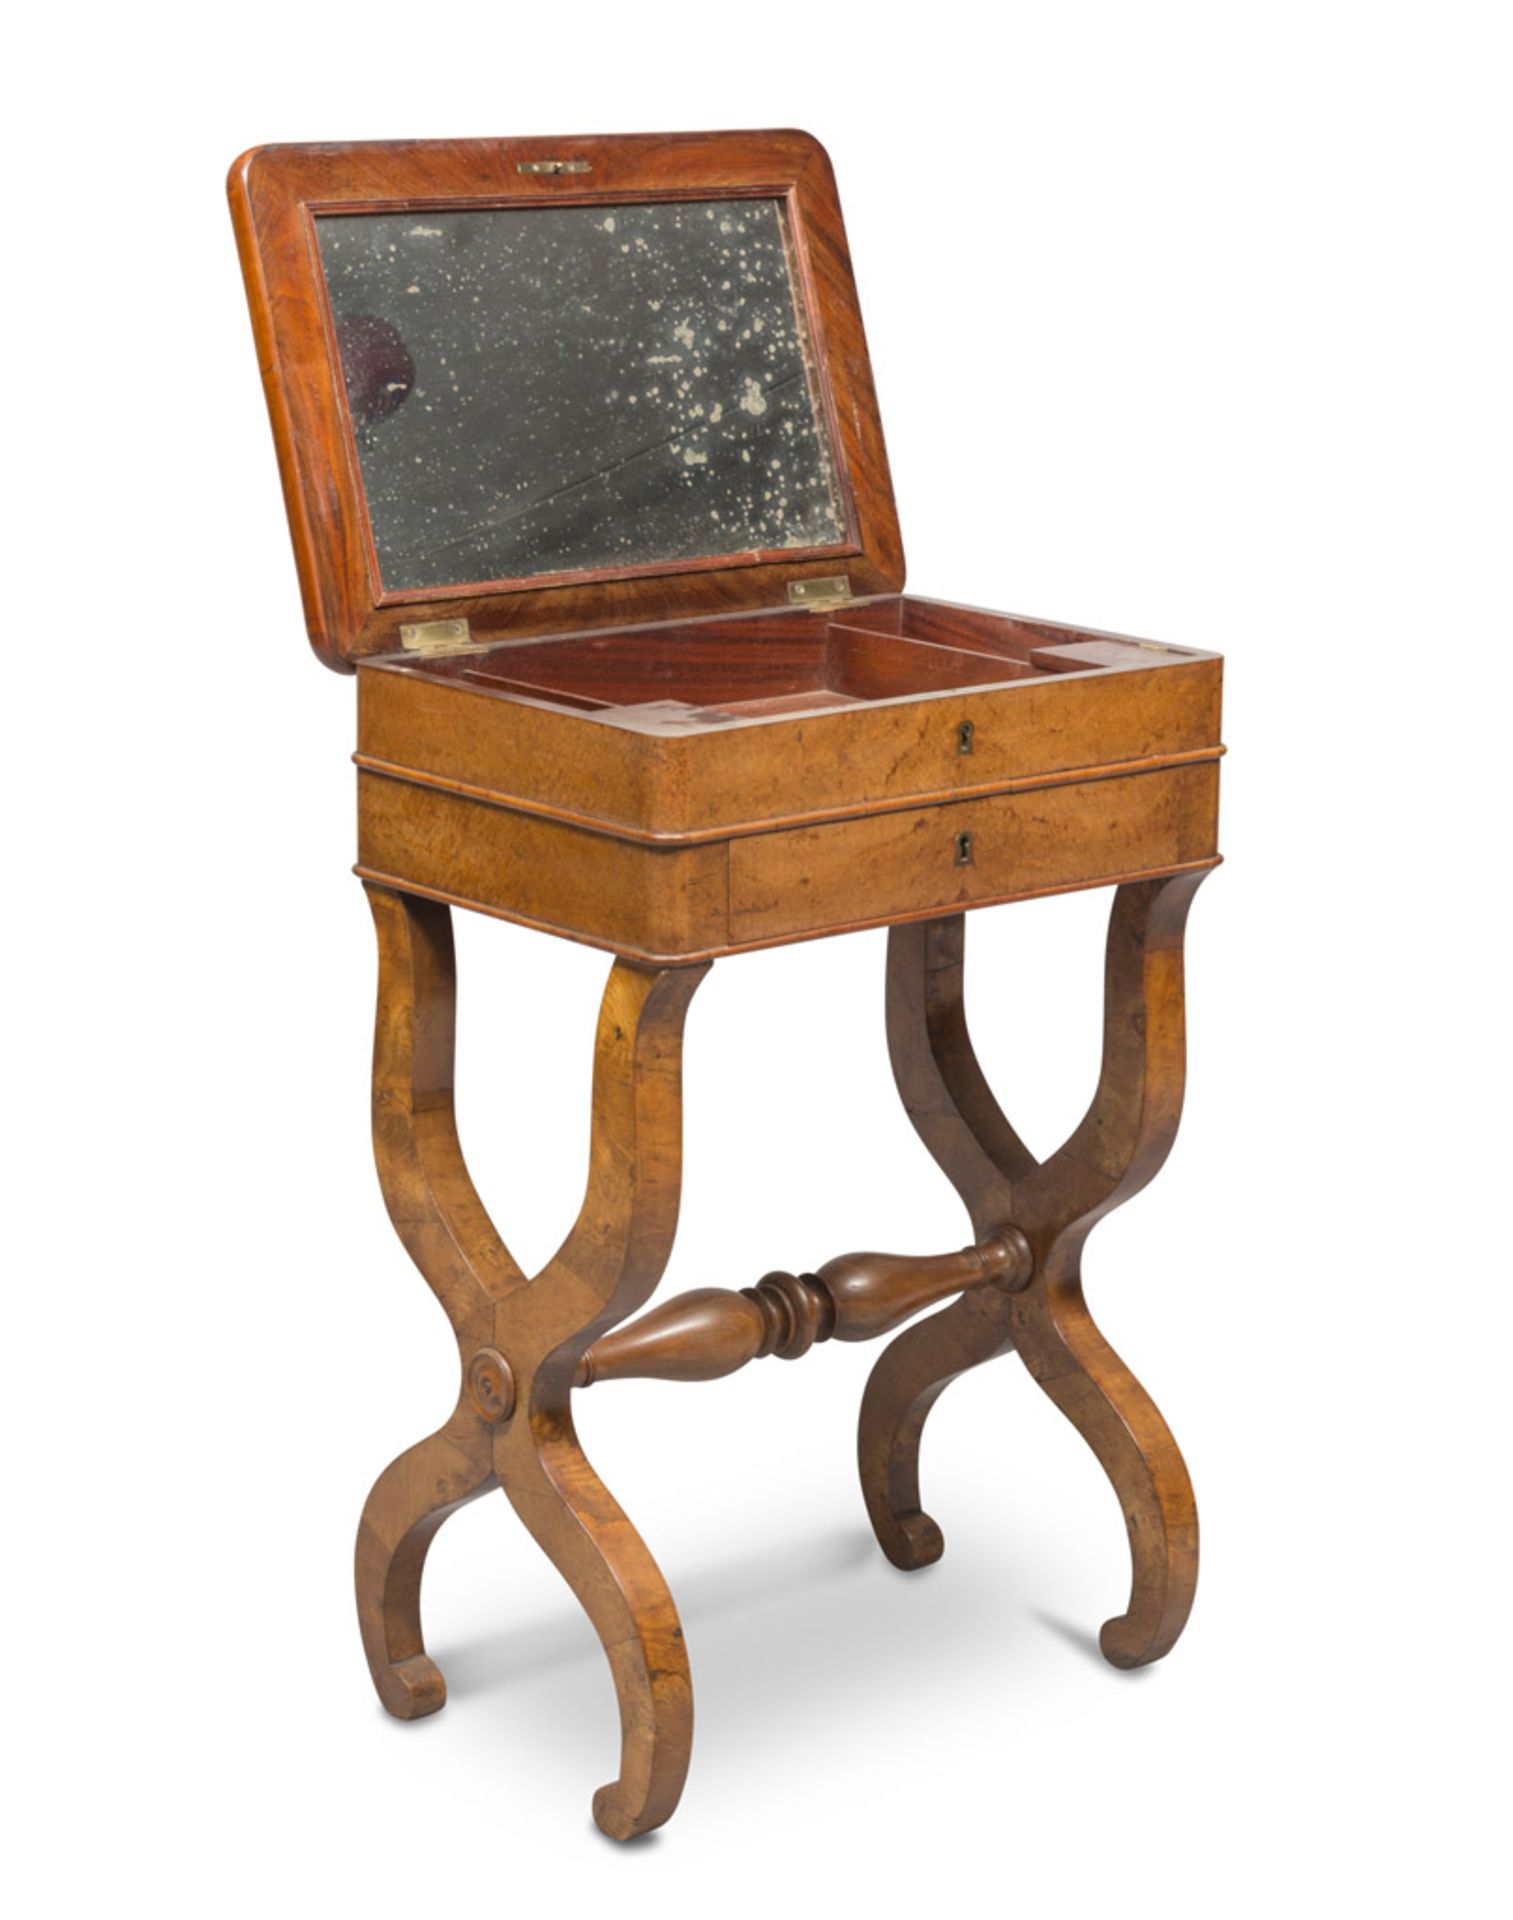 BEAUTIFUL SMALL WORKING TABLE IN BRIAR ELM WOOD, 19TH CENTURY flip-top with mirror, complete of - Image 2 of 2